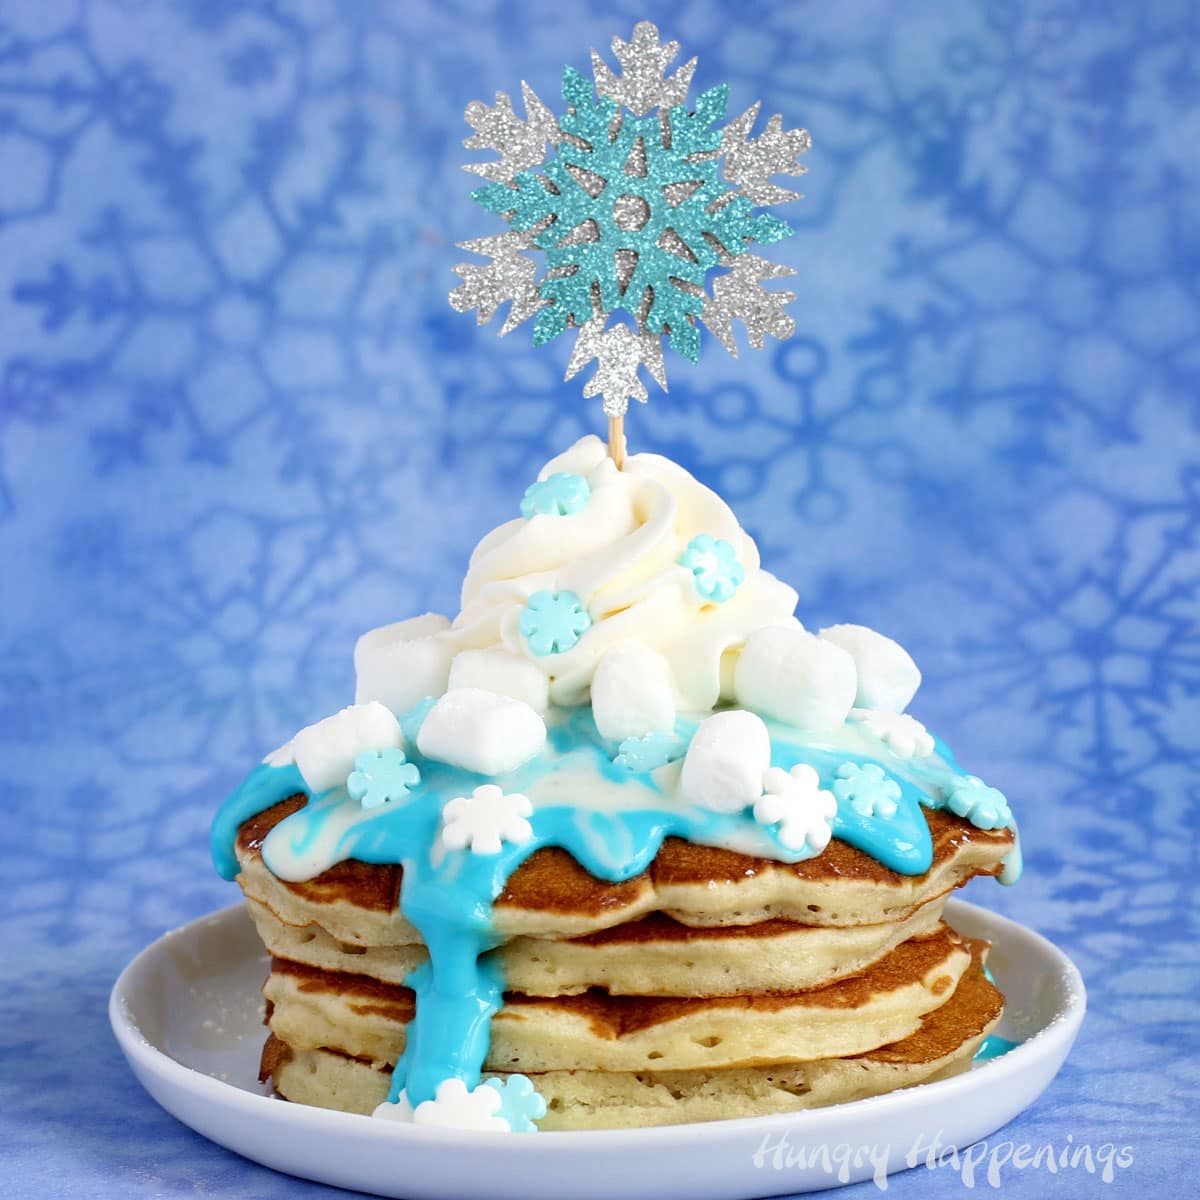 Disney's Frozen Pancakes topped with candy snowflakes, whipped cream, and marshmallows.